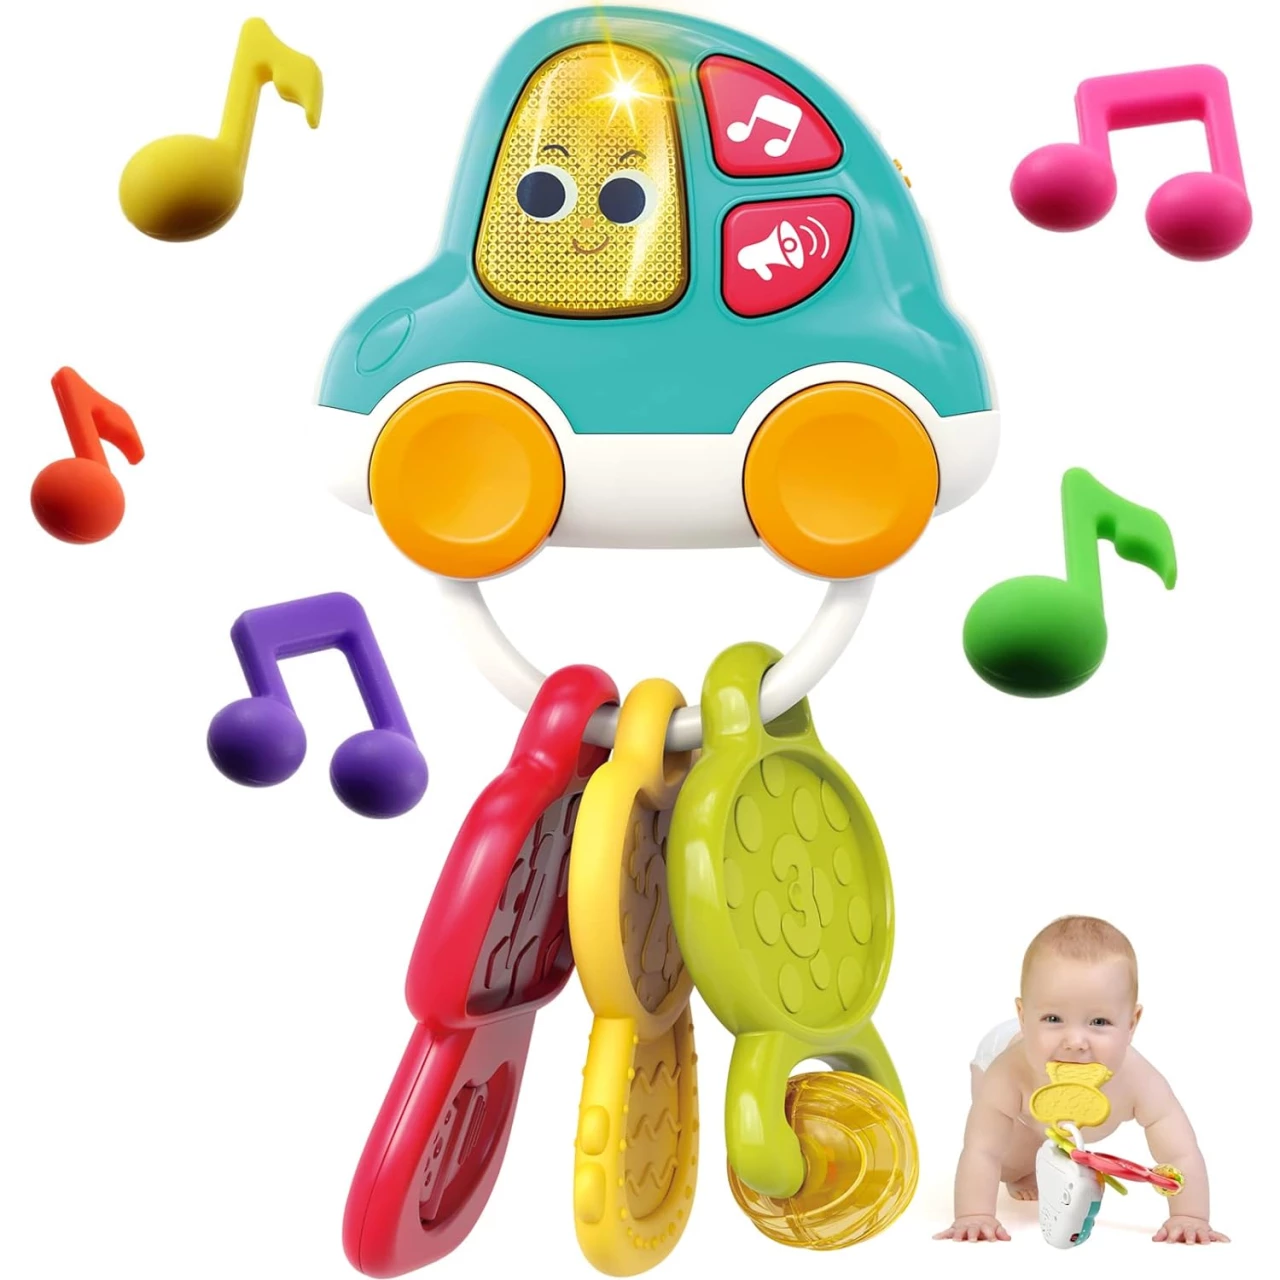 Yiosion Baby Musical Rattle Teether Set, Shaker, Grab and Spin Rattle, Early Educational FunKeys Toy Car Keychain with Light and Sounds, Gift for 3, 6, 9, 12 Month Infant Newborn